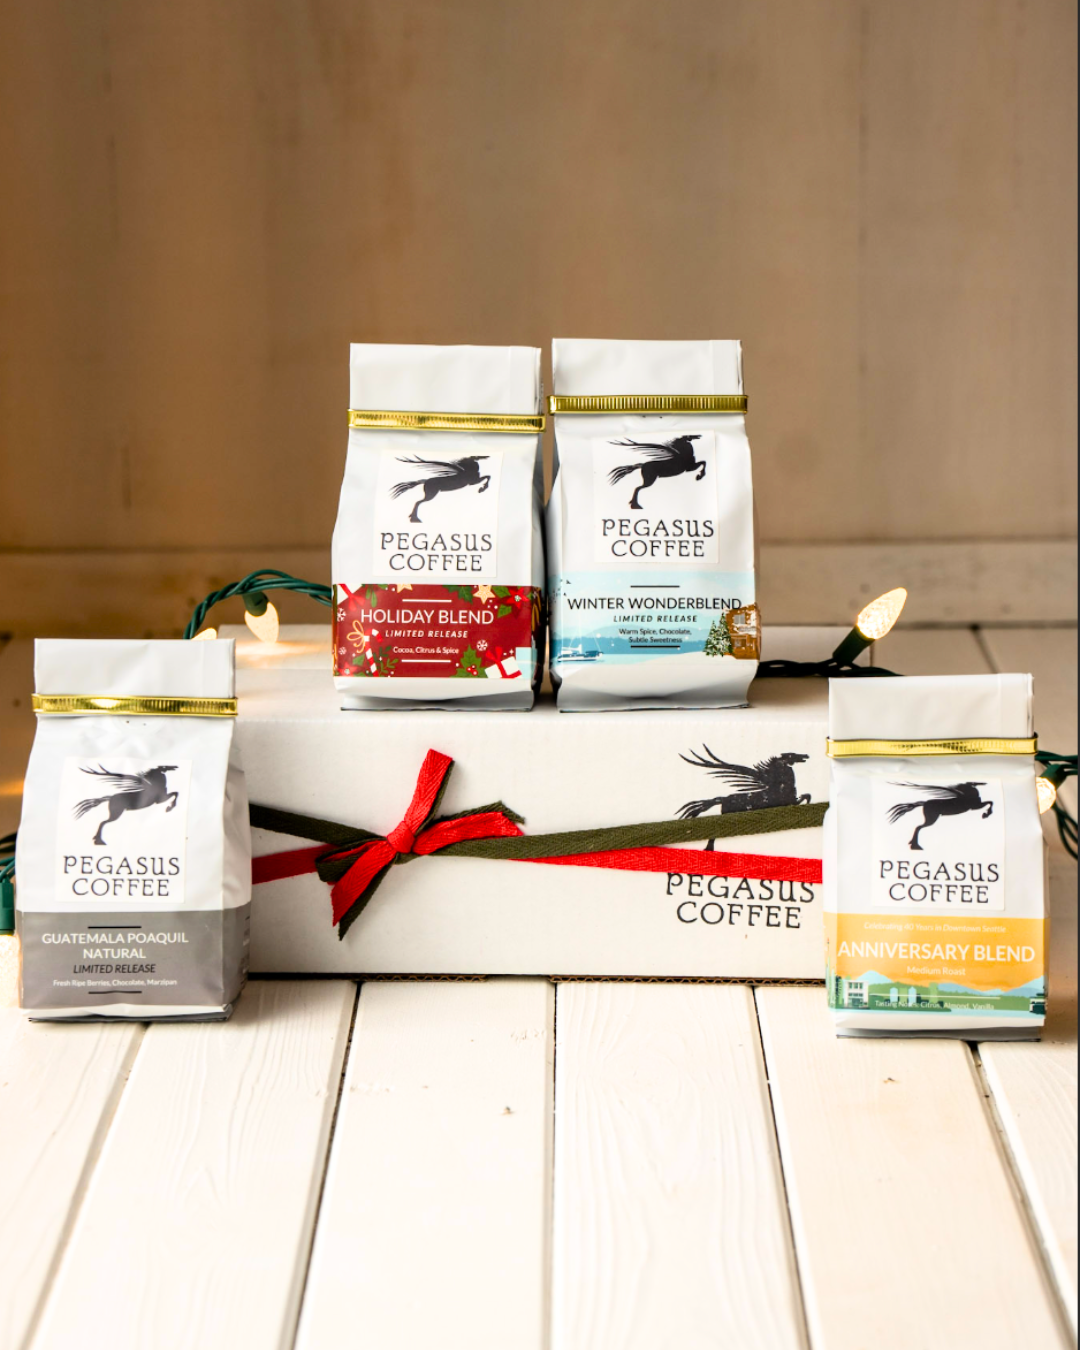 Pegasus Coffee Gift Box In front of ribbon-wrapped box